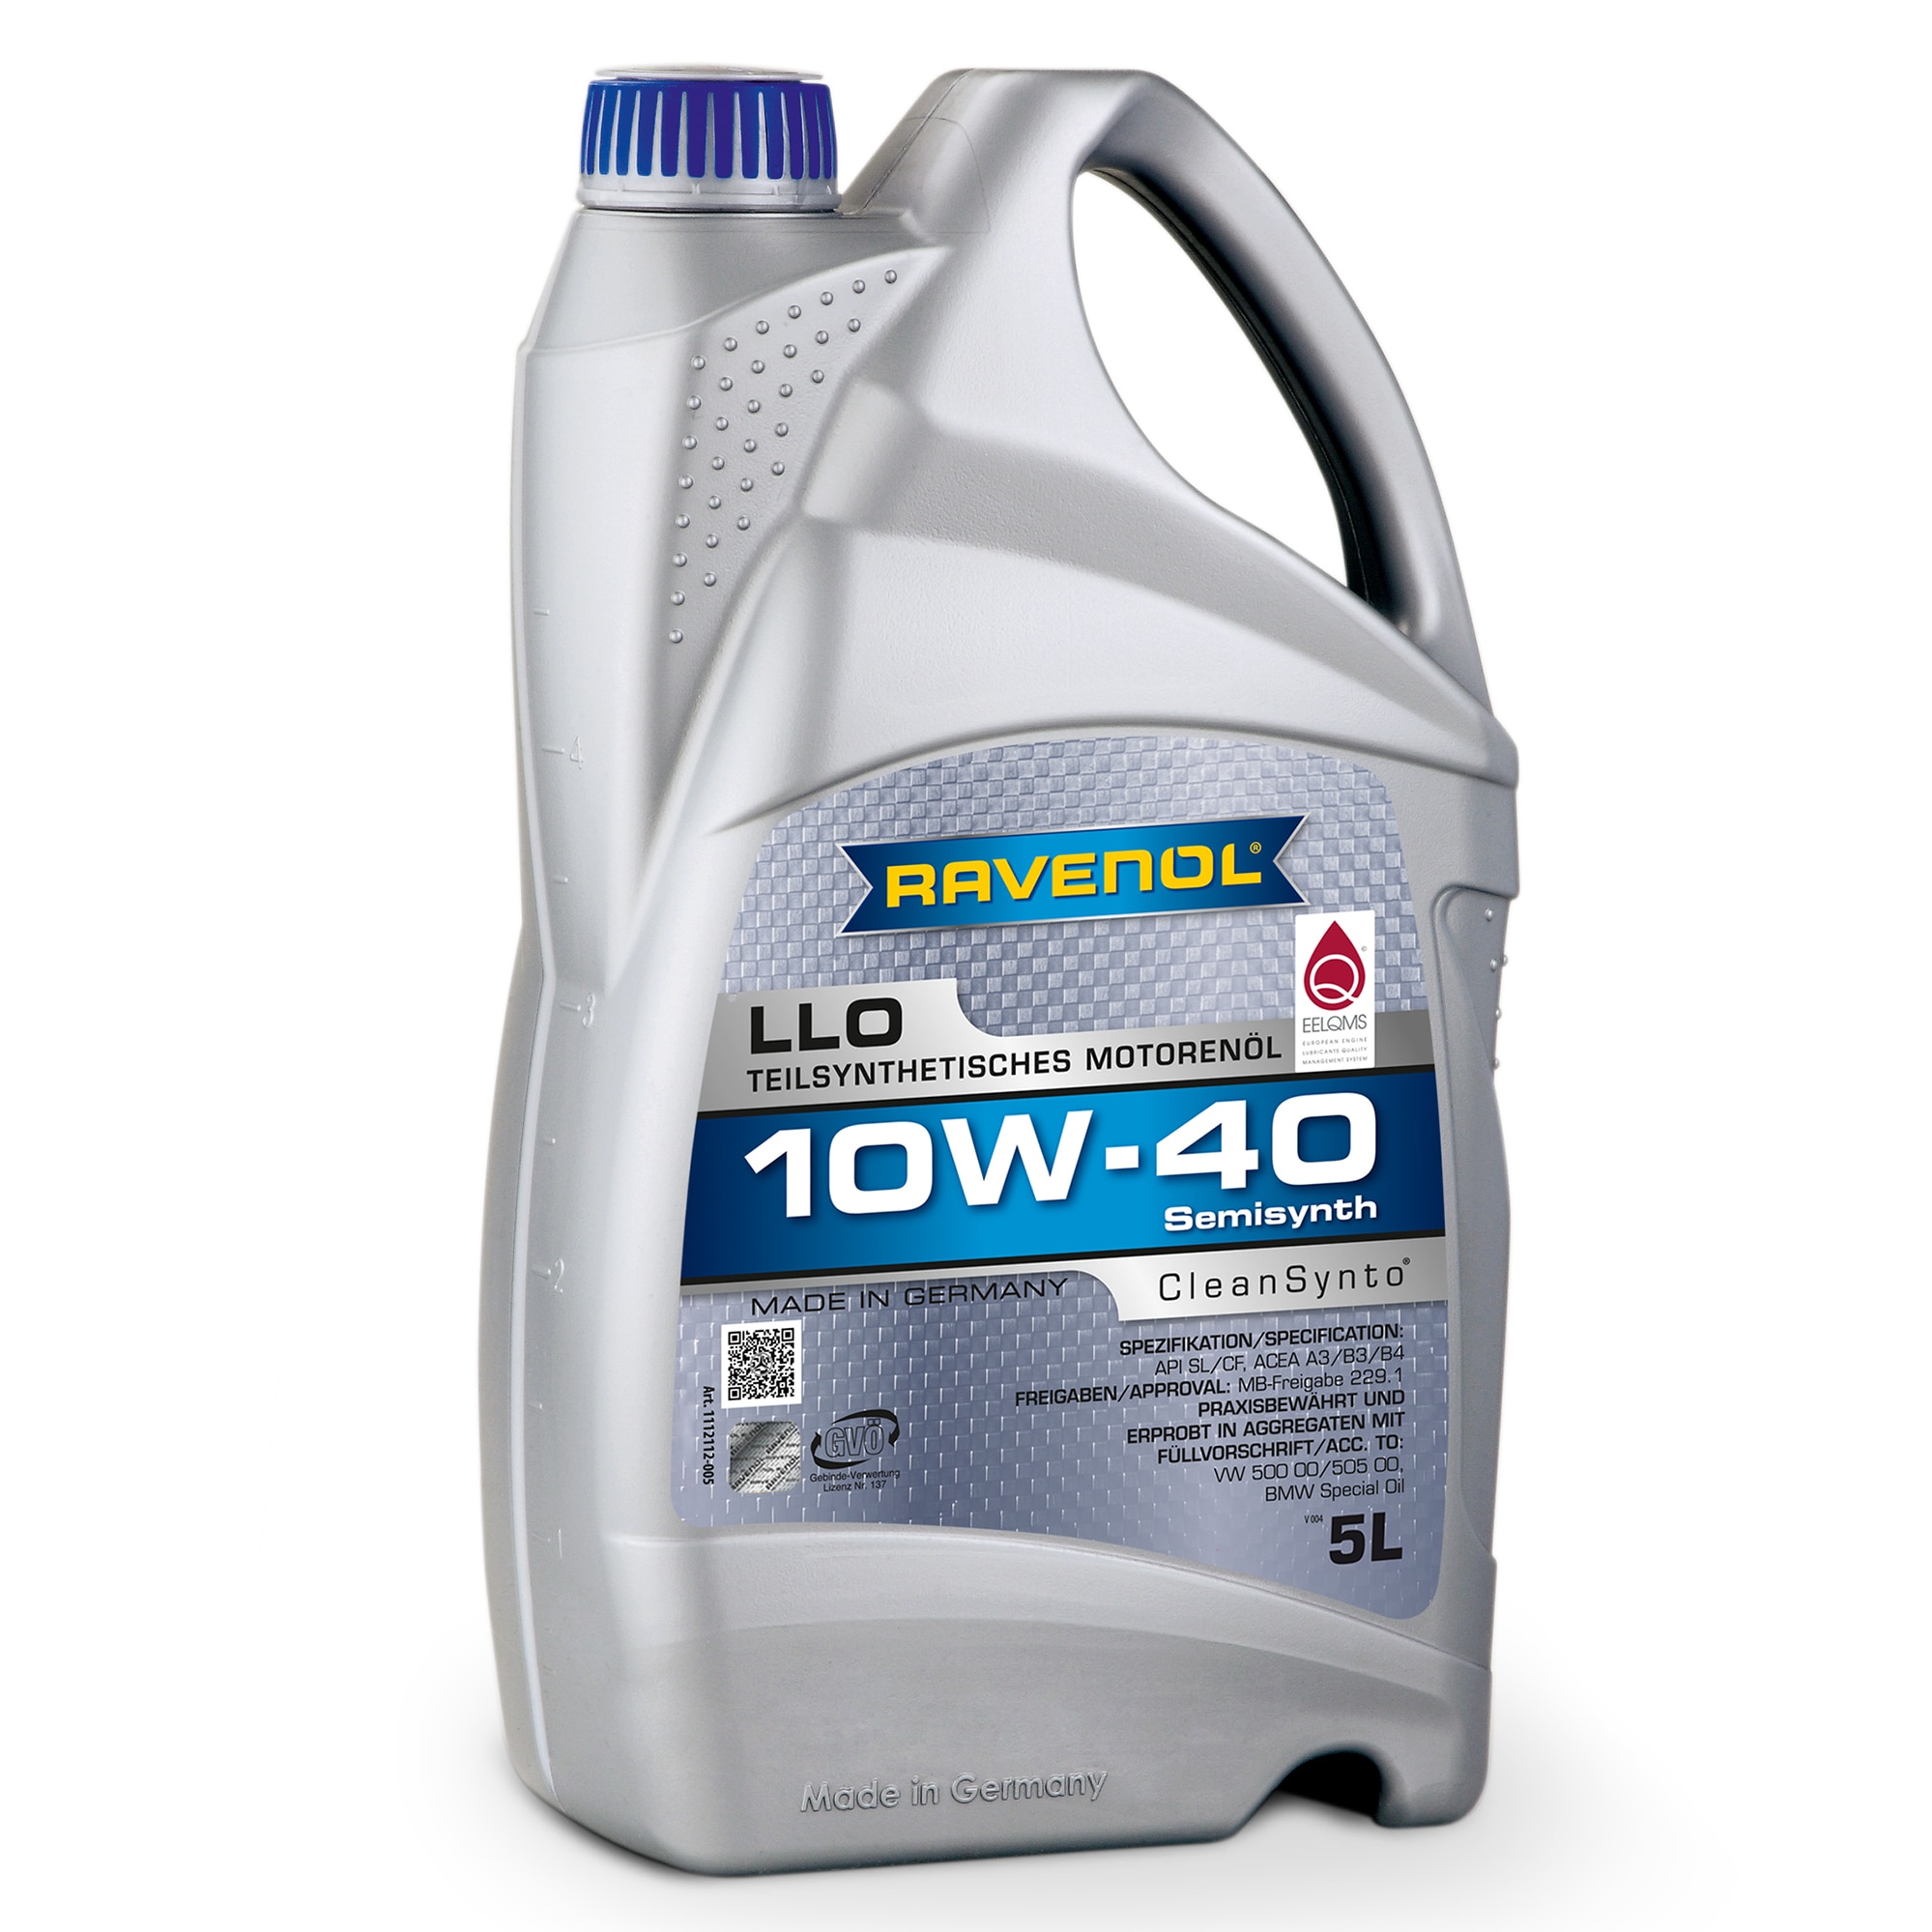 paralysis tuition fee did not notice Ulei motor RAVENOL LLO, 10W40, 5L - eMAG.ro